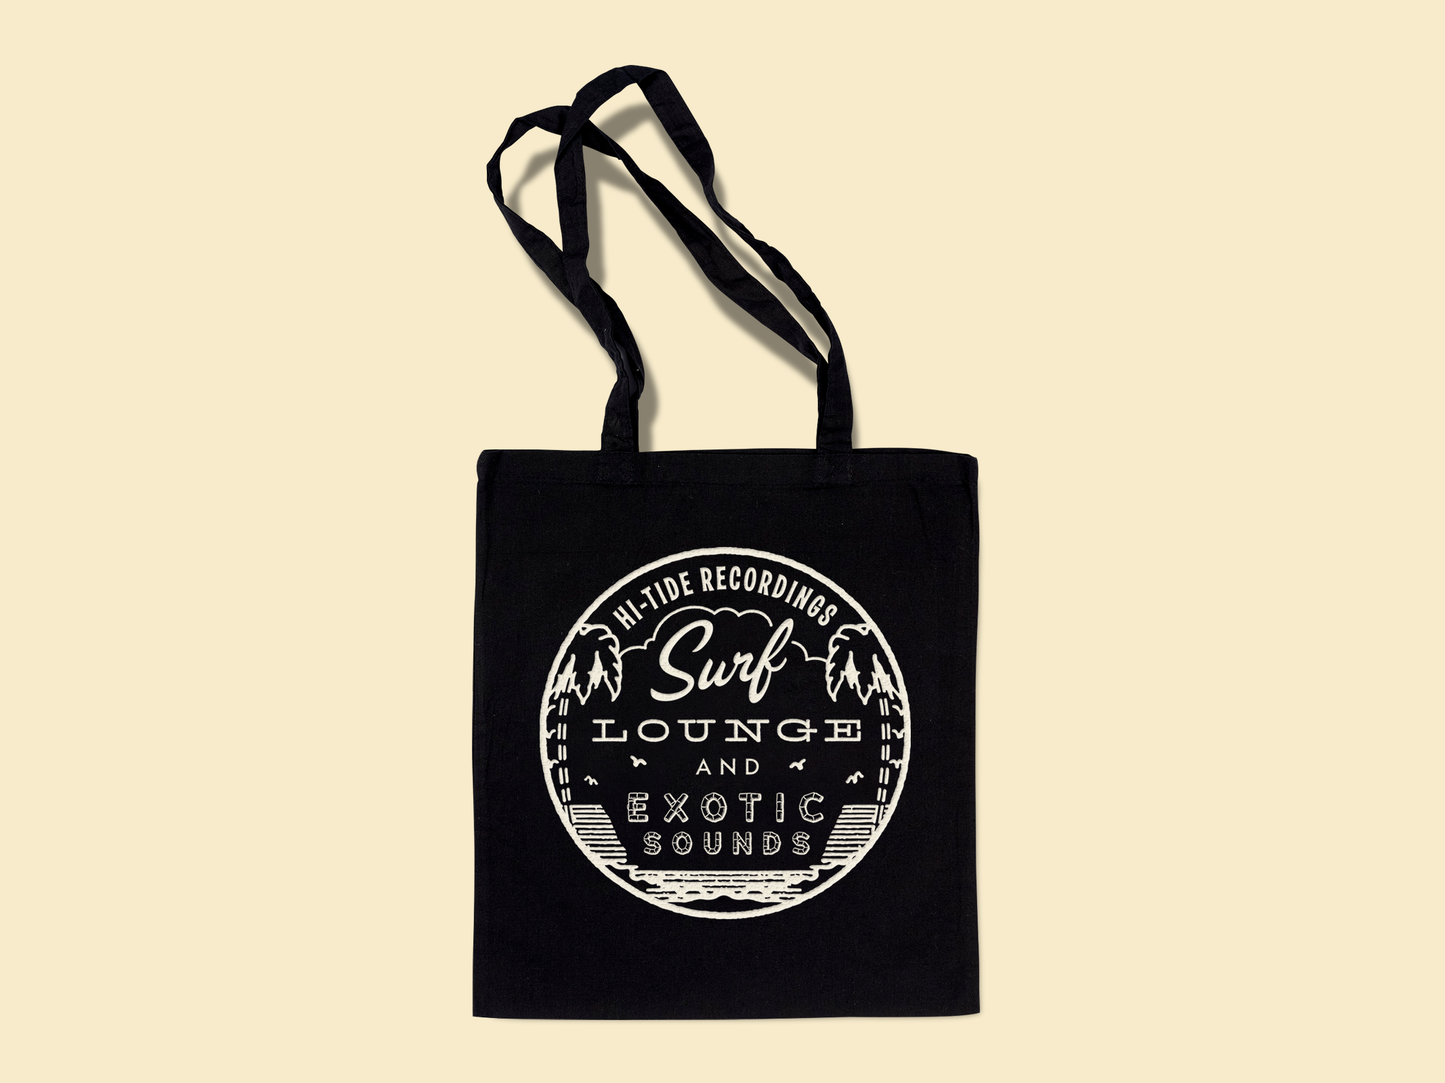 Surf, Lounge & Exotic Sounds Canvas Record Tote